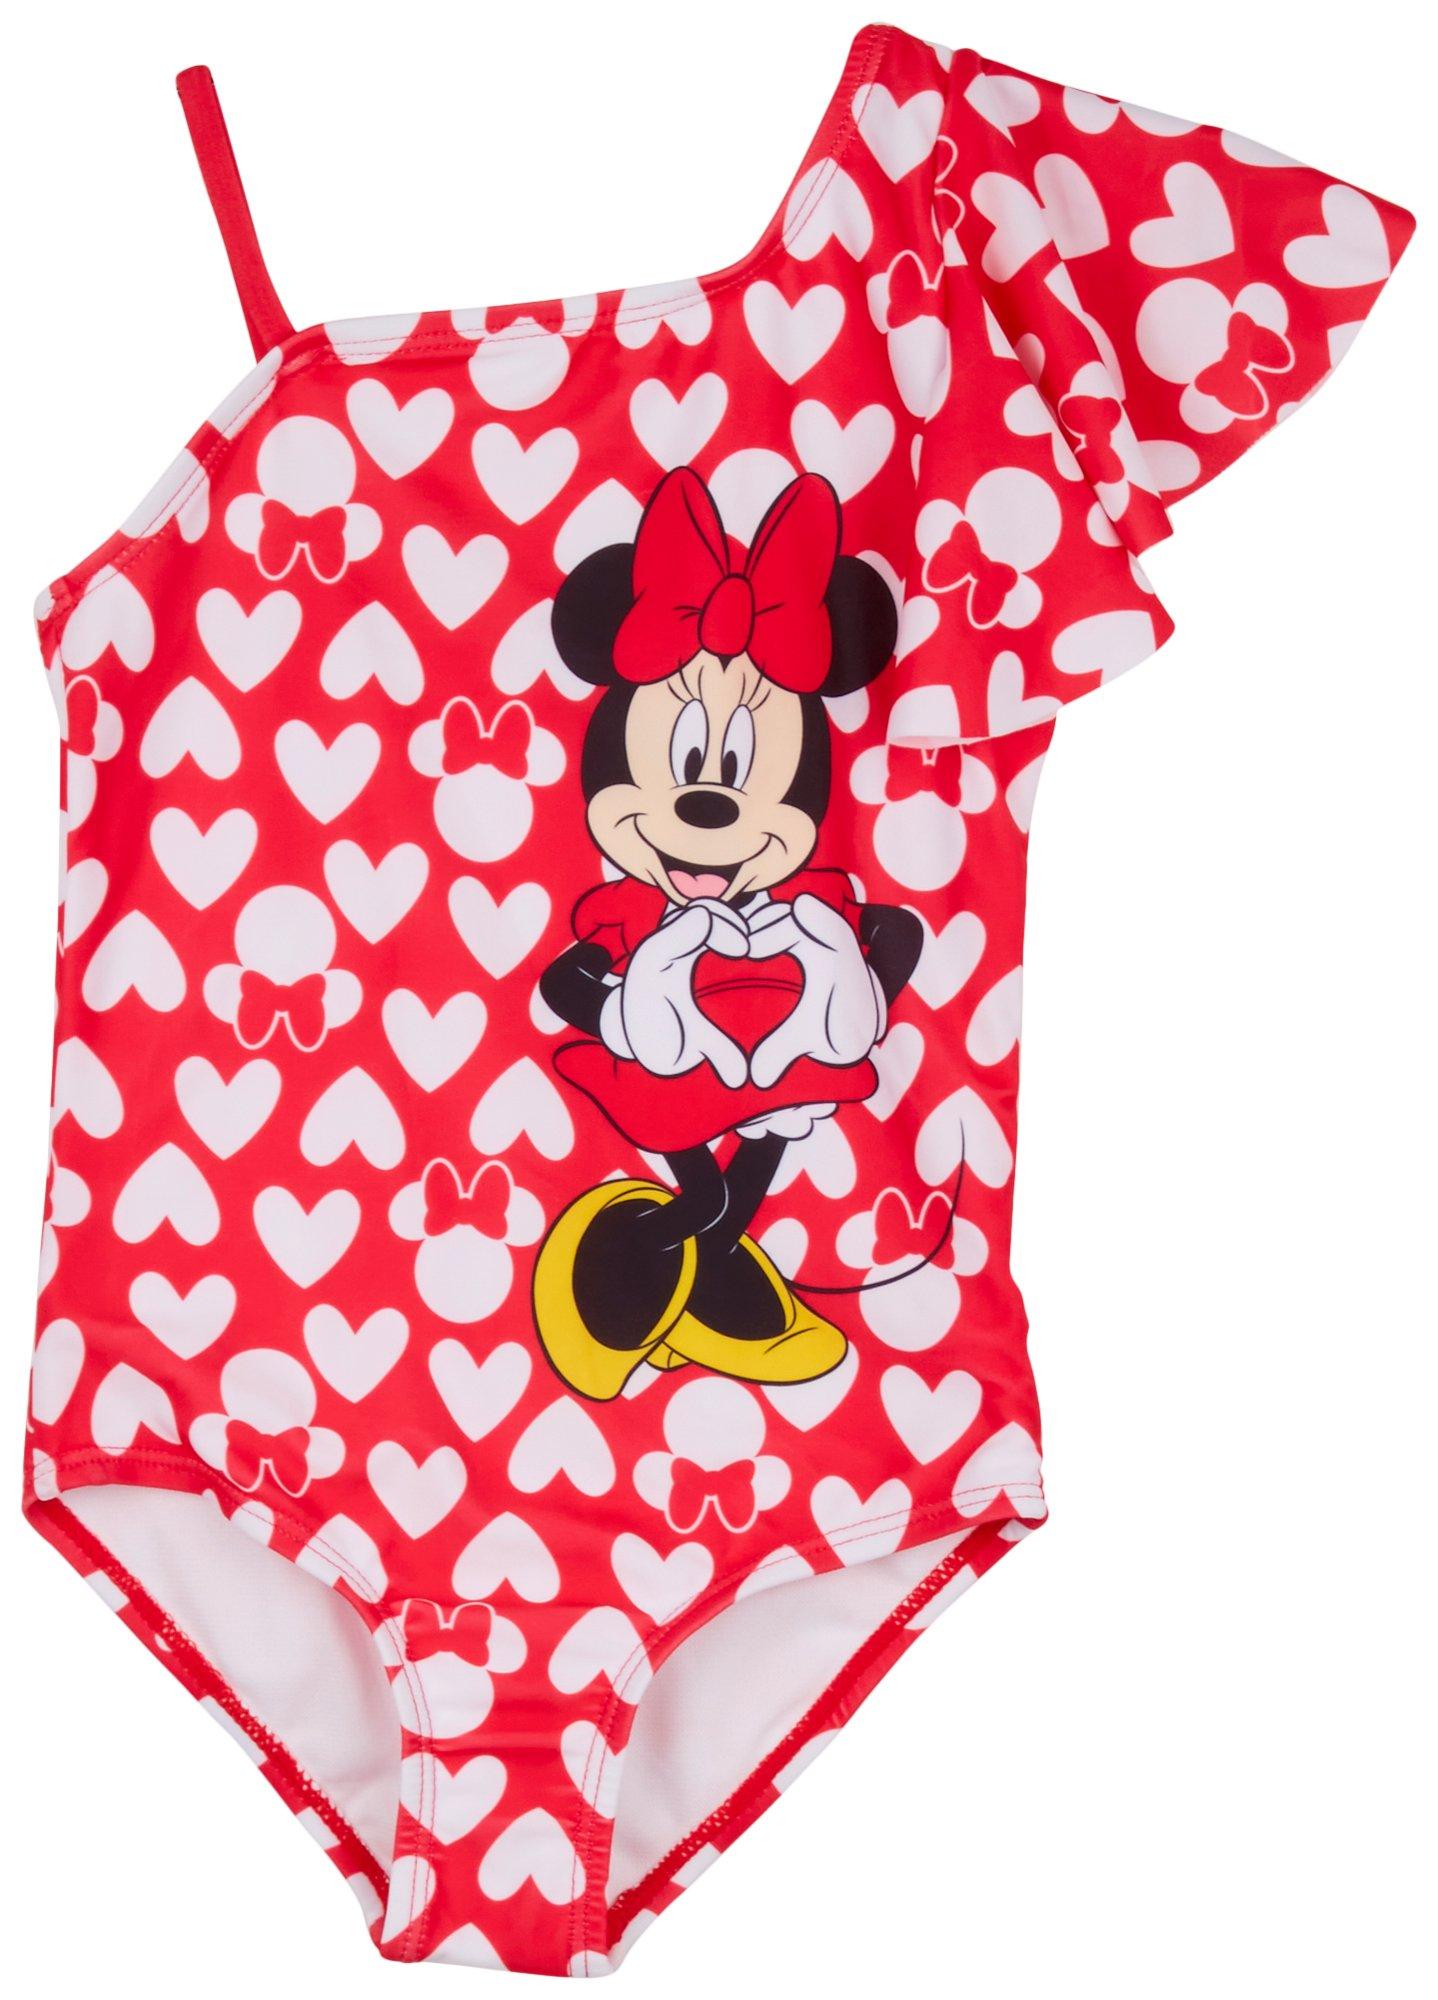 Toddler Girls Minnie Mouse One Piece Swimsuit